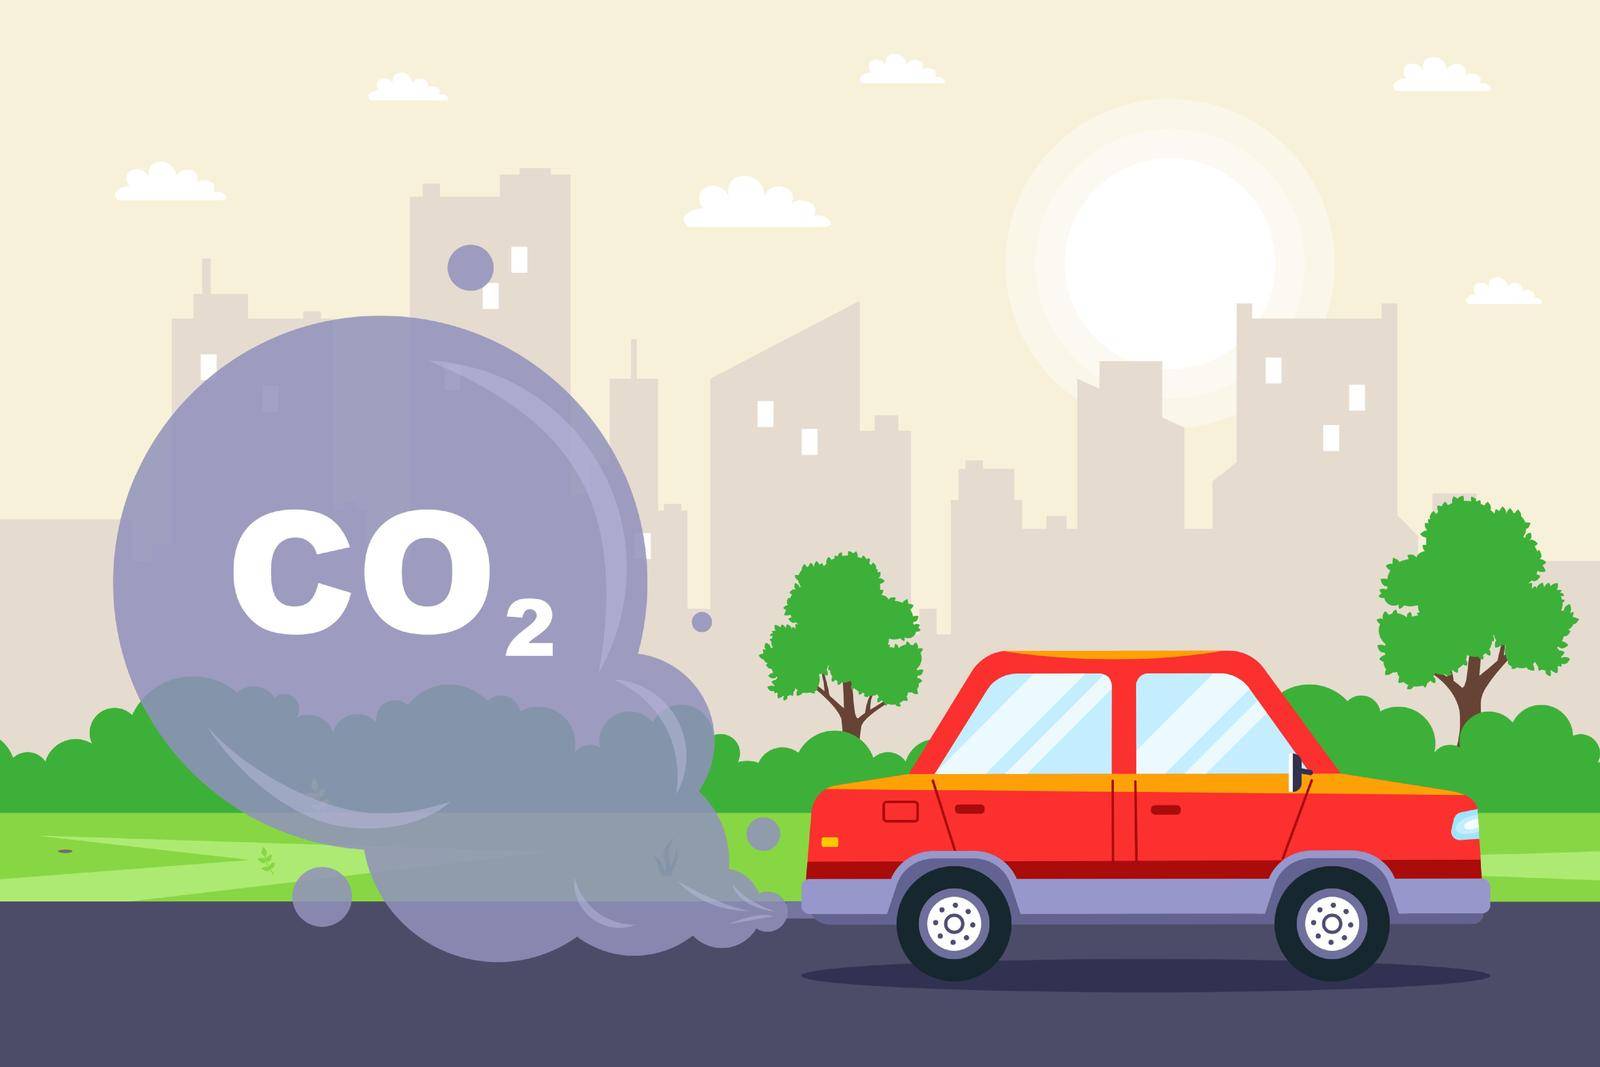 the car produces a large amount of exhaust gases. delusional substances CO2. flat vector illustration.